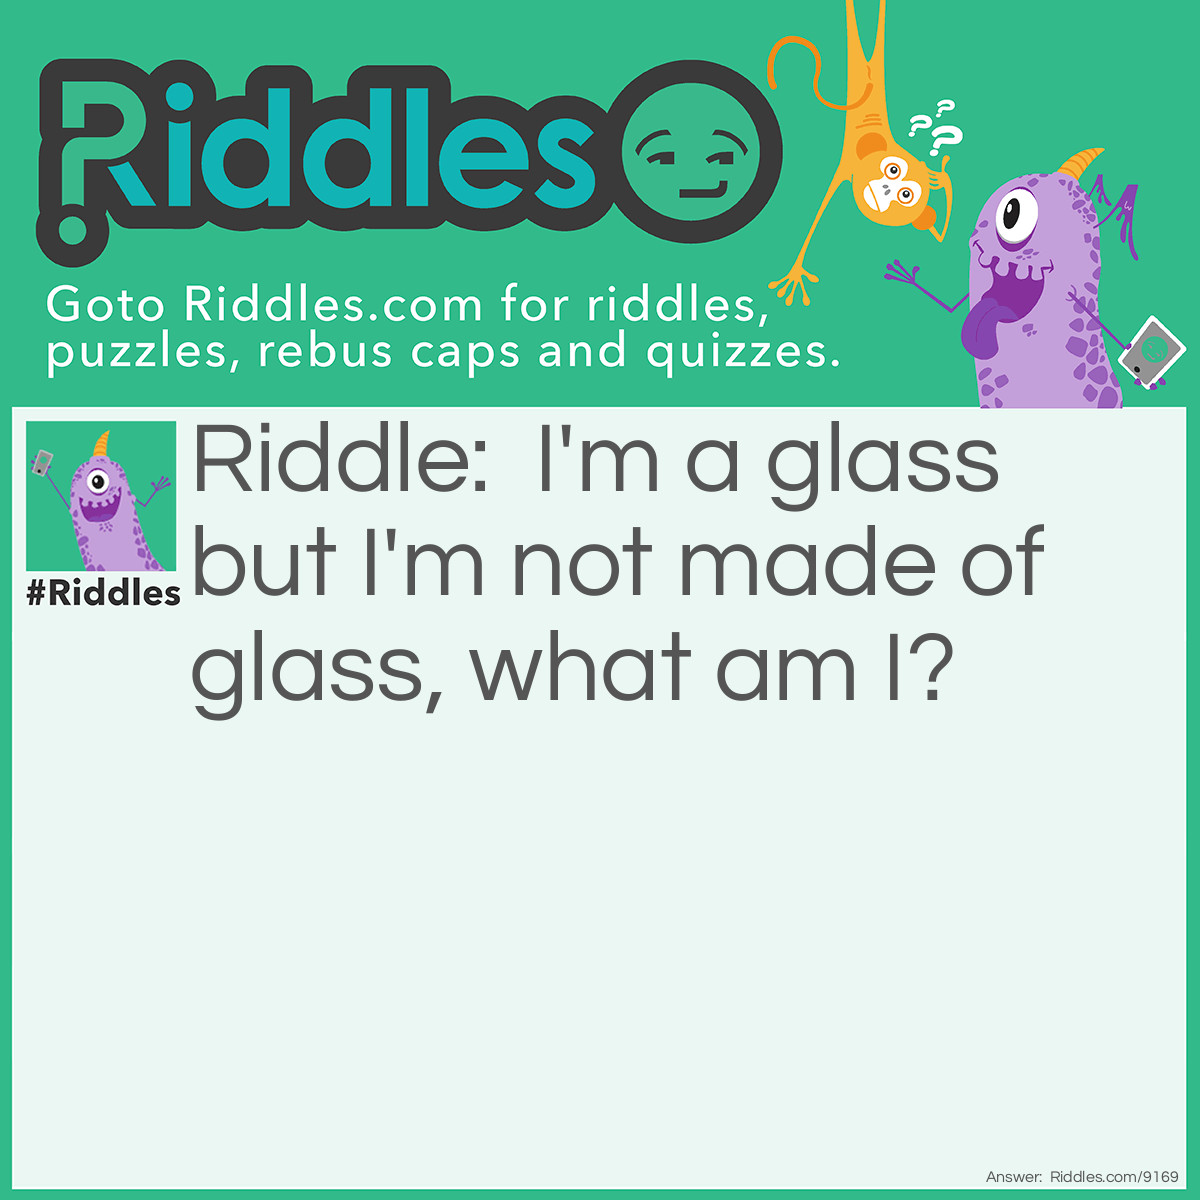 Riddle: I'm a glass but I'm not made of glass, what am I? Answer: A plastic cup.